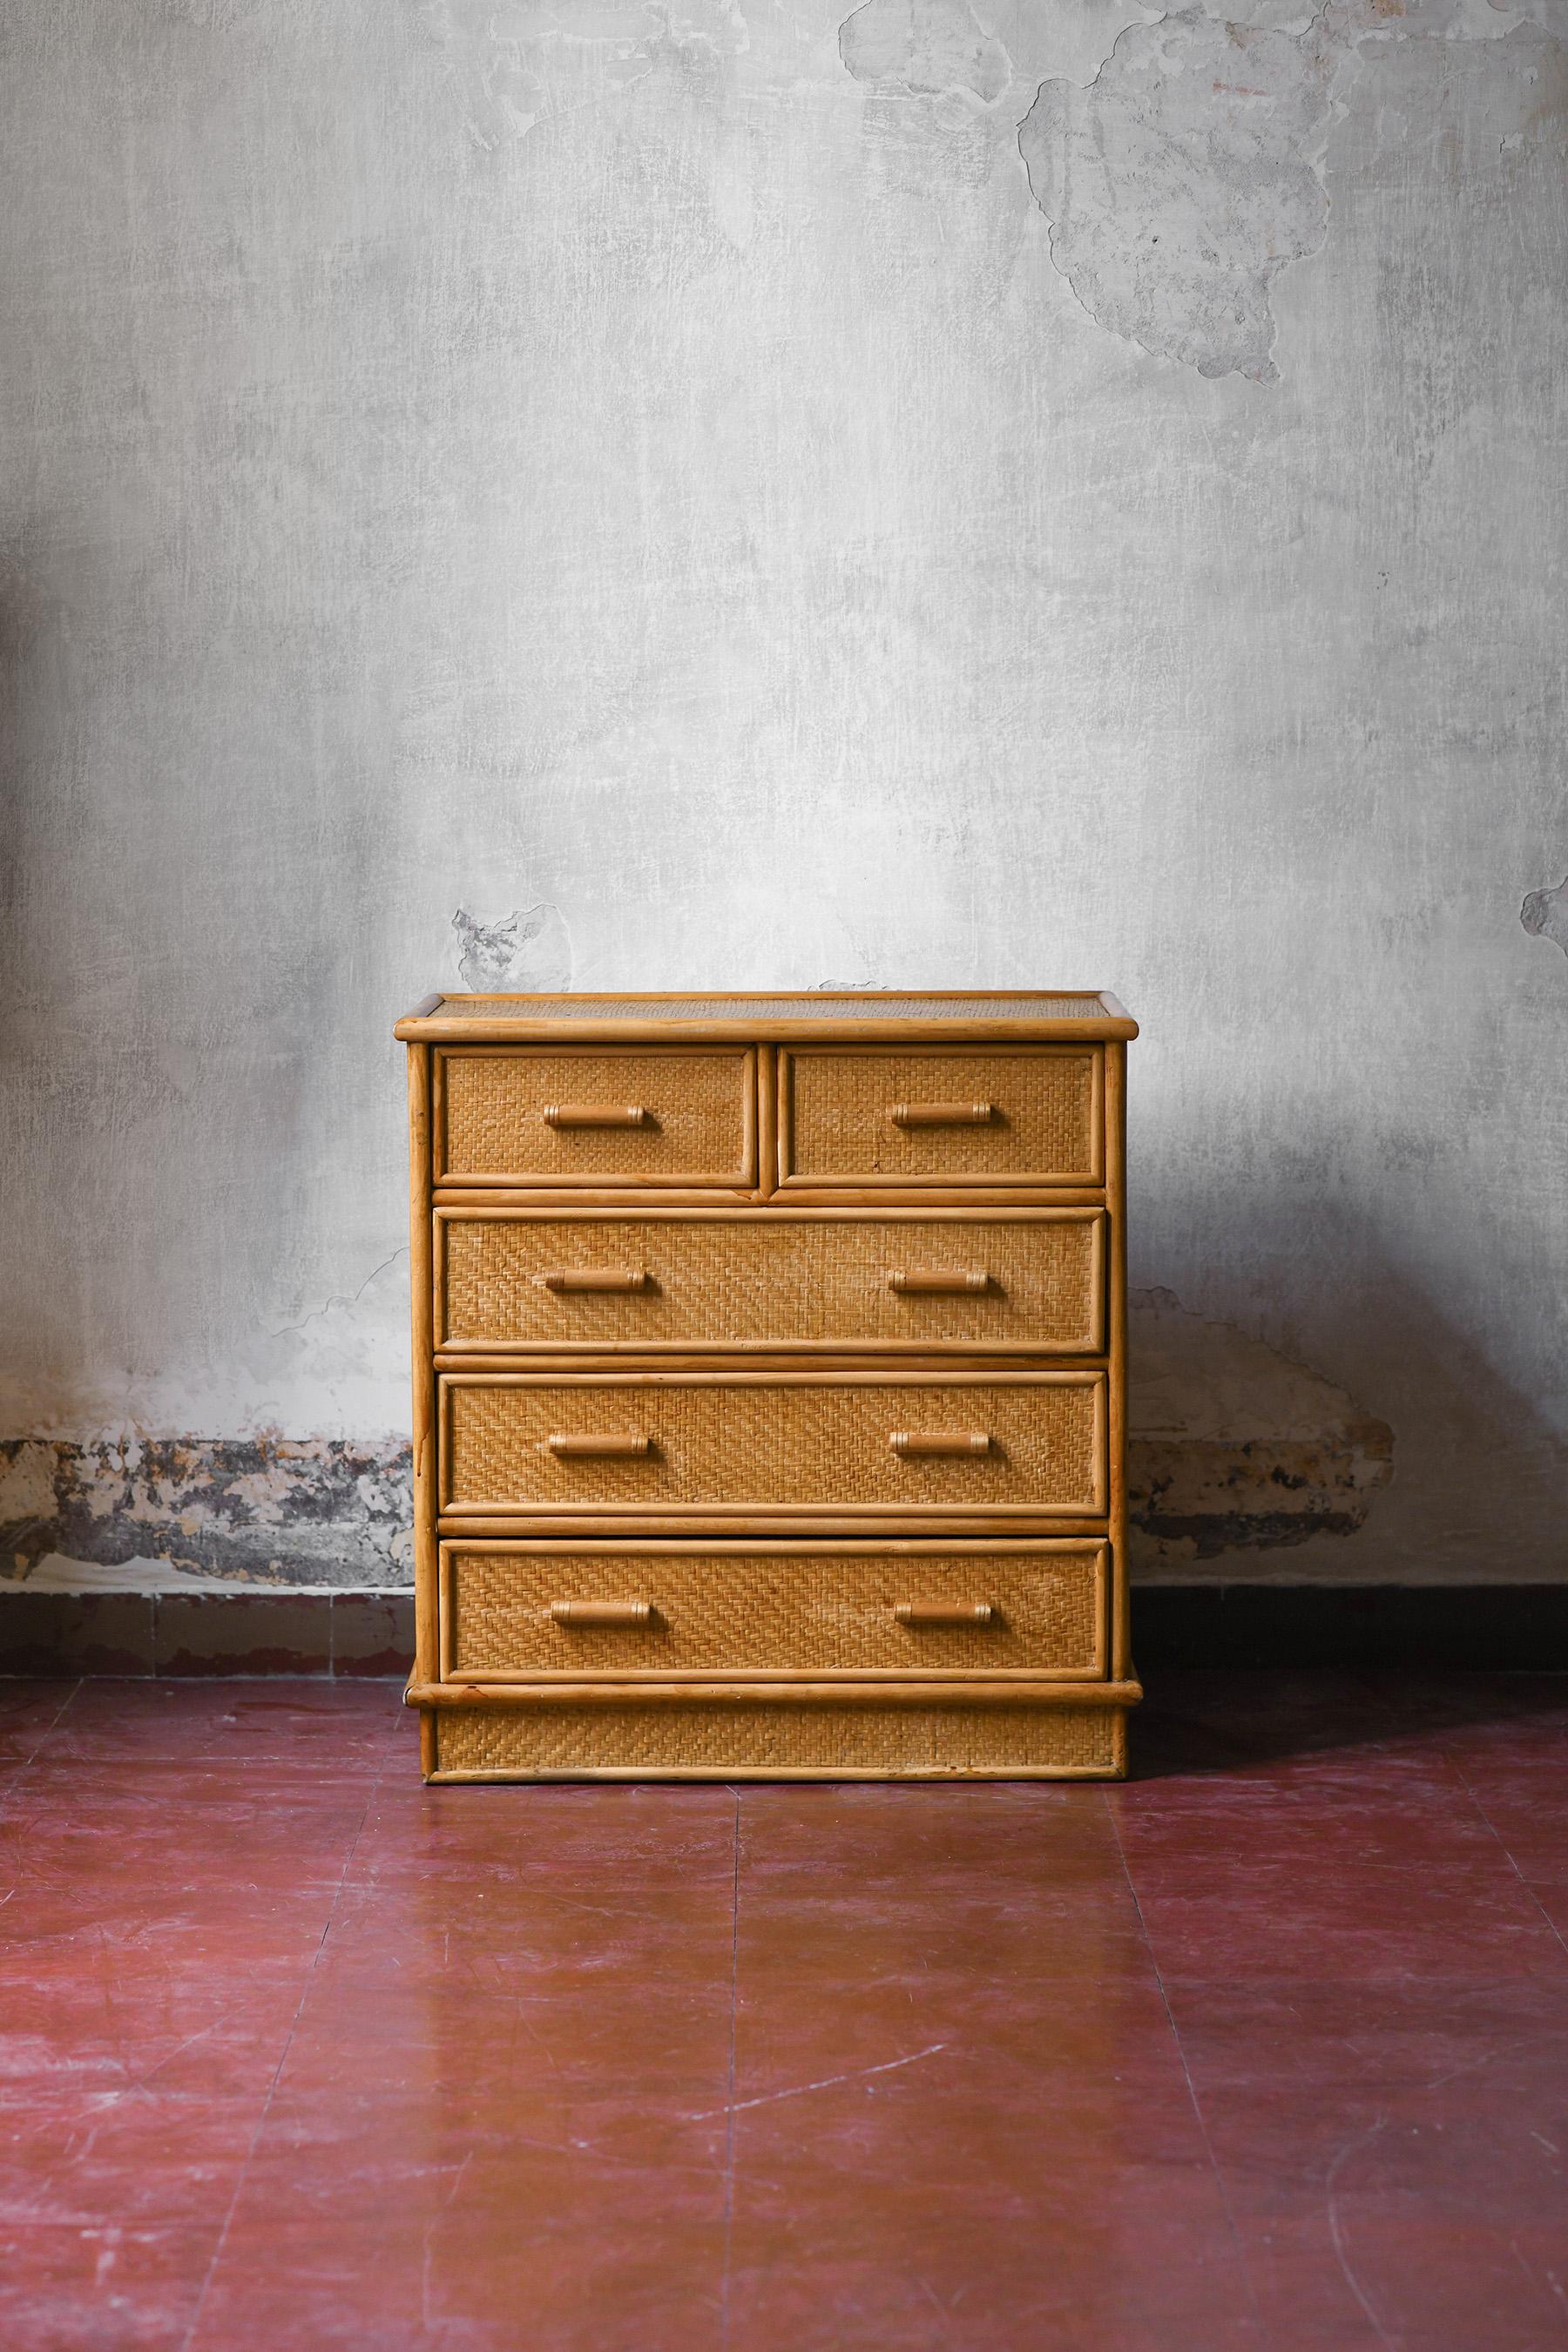 Wood and rattan chest of drawers, 1980
Product details
Dimensions: 75 Lenght x 79 Height  x 42 Depth cm